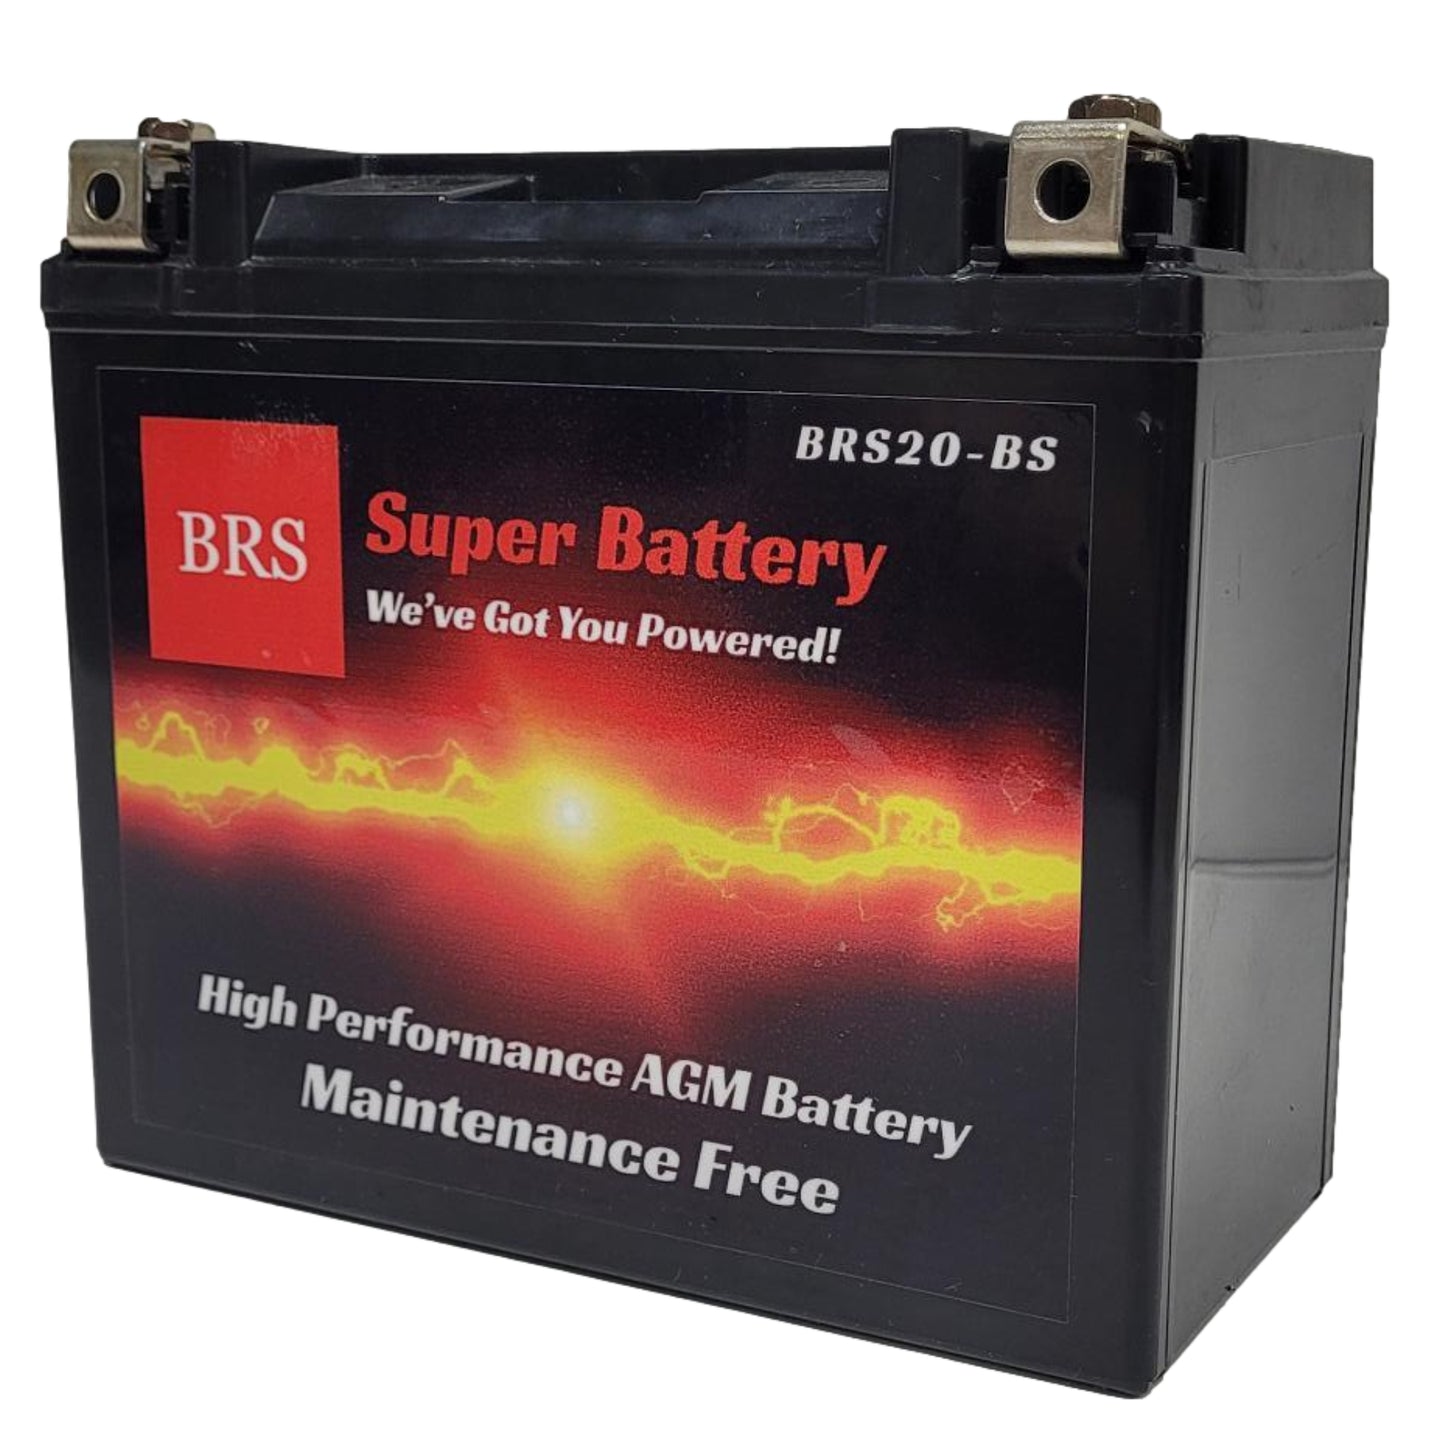 WPX20-BS 12v High Performance Sealed AGM PowerSport 10 Year Battery - BRS Super Battery